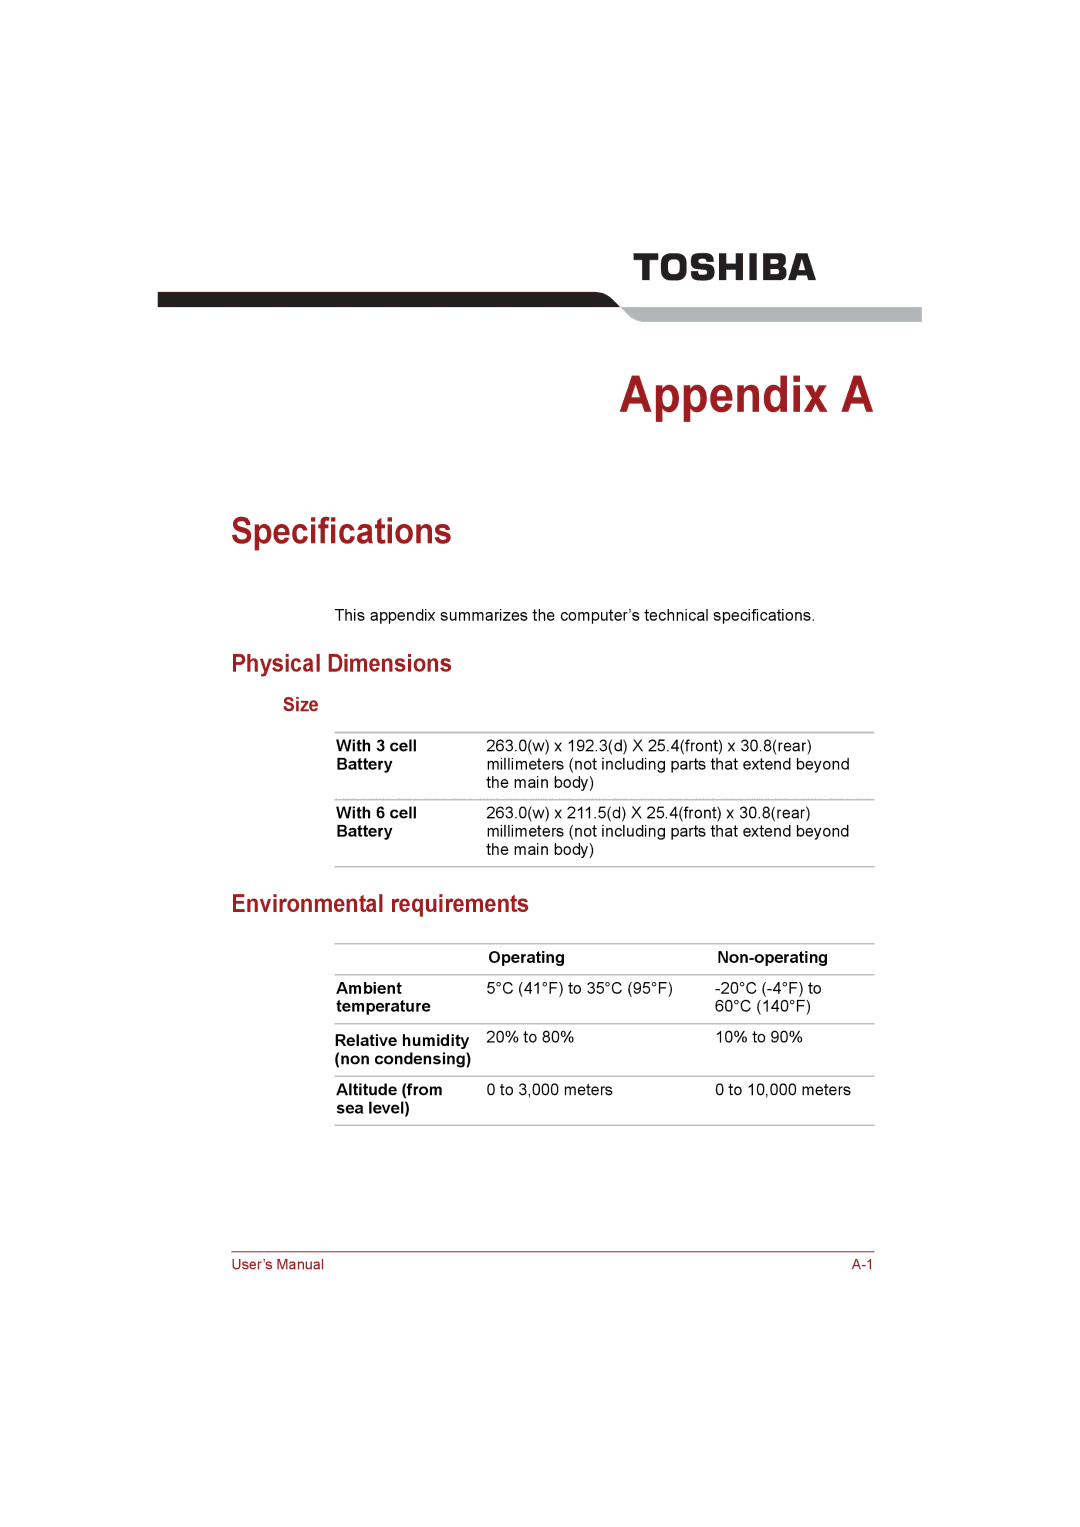 Toshiba NB255N245 user manual Specifications, Physical Dimensions, Environmental requirements, Size 